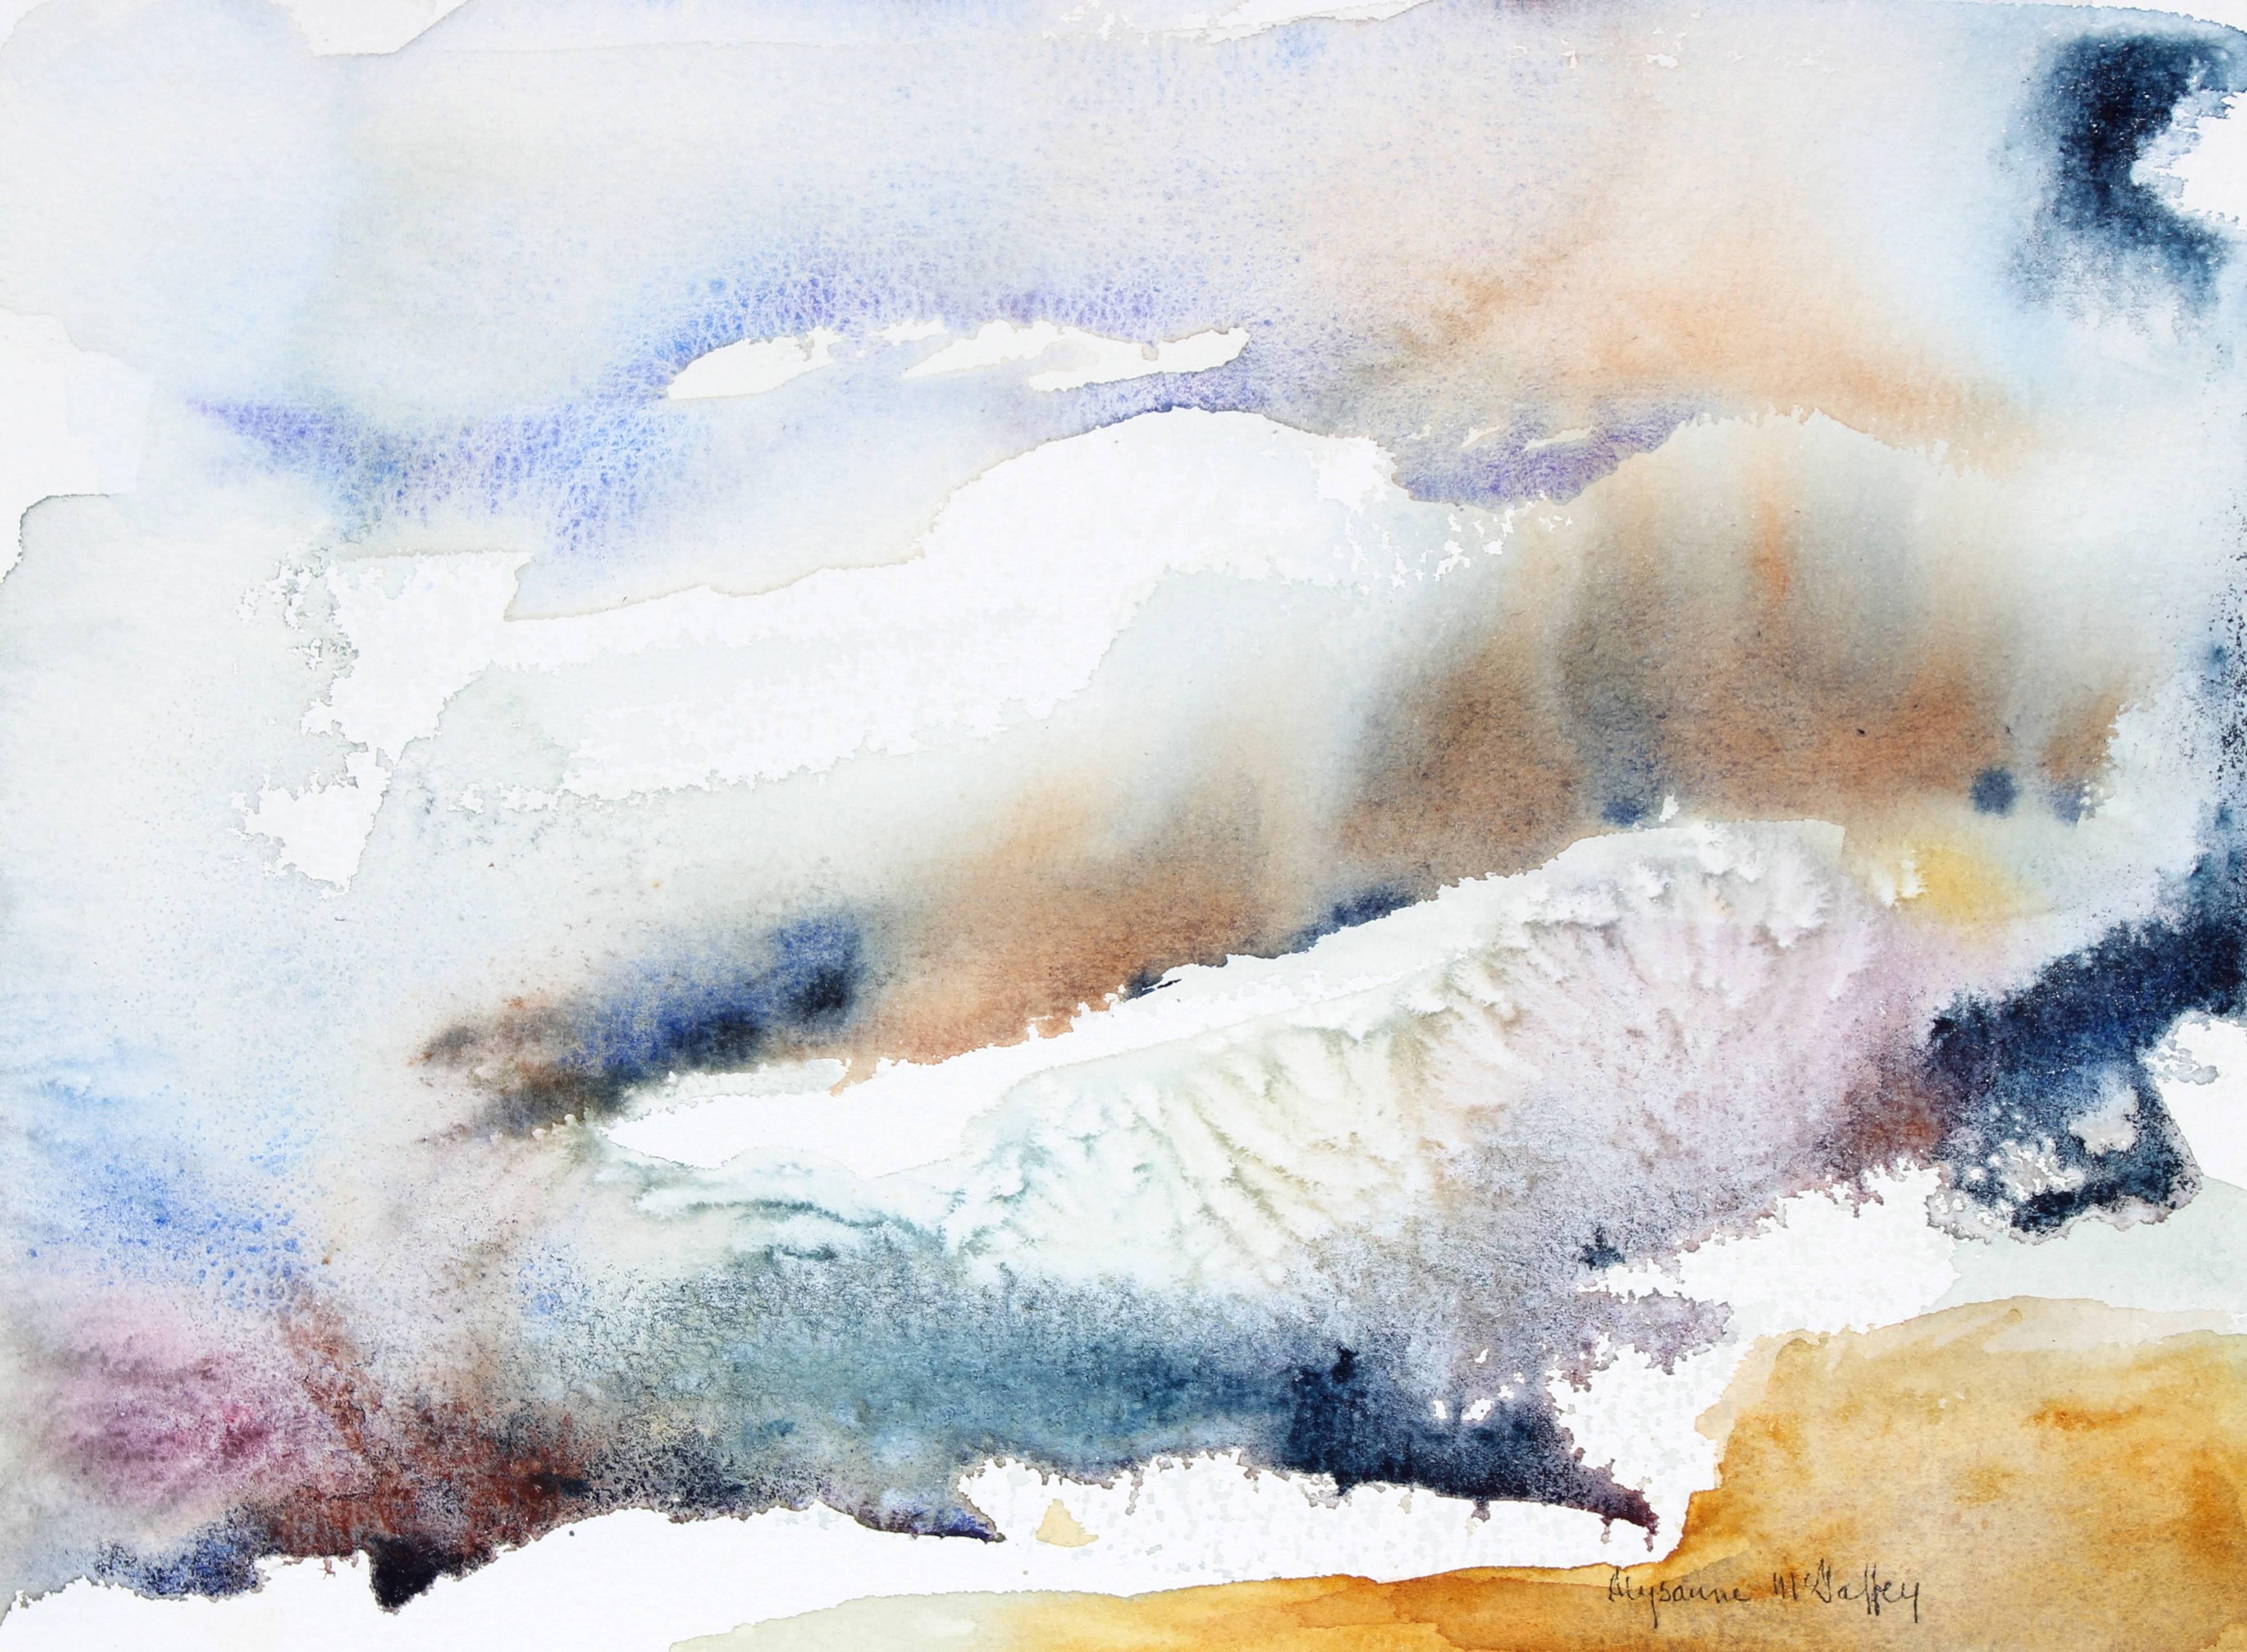 Alysanne McGaffey Abstract Drawing - "Coast Current" Pacifica, CA 